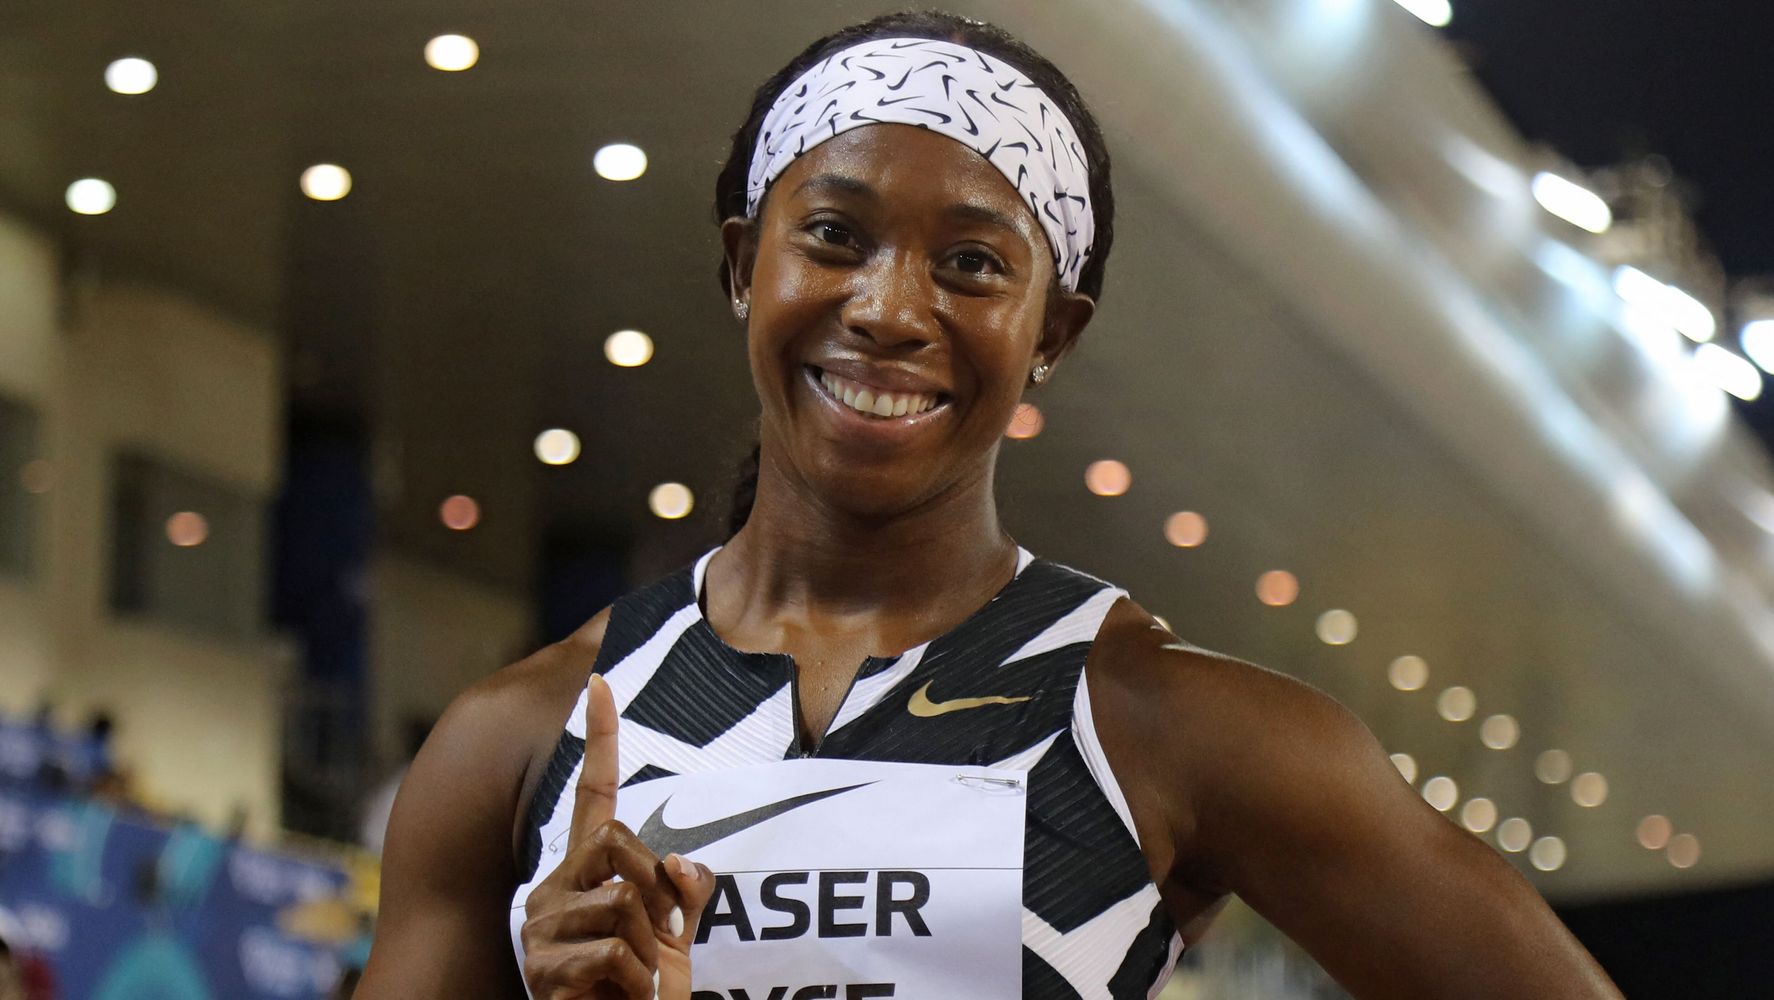 world news,jamaica,Track and Field,olympians,shelly-ann fraser-pryce.